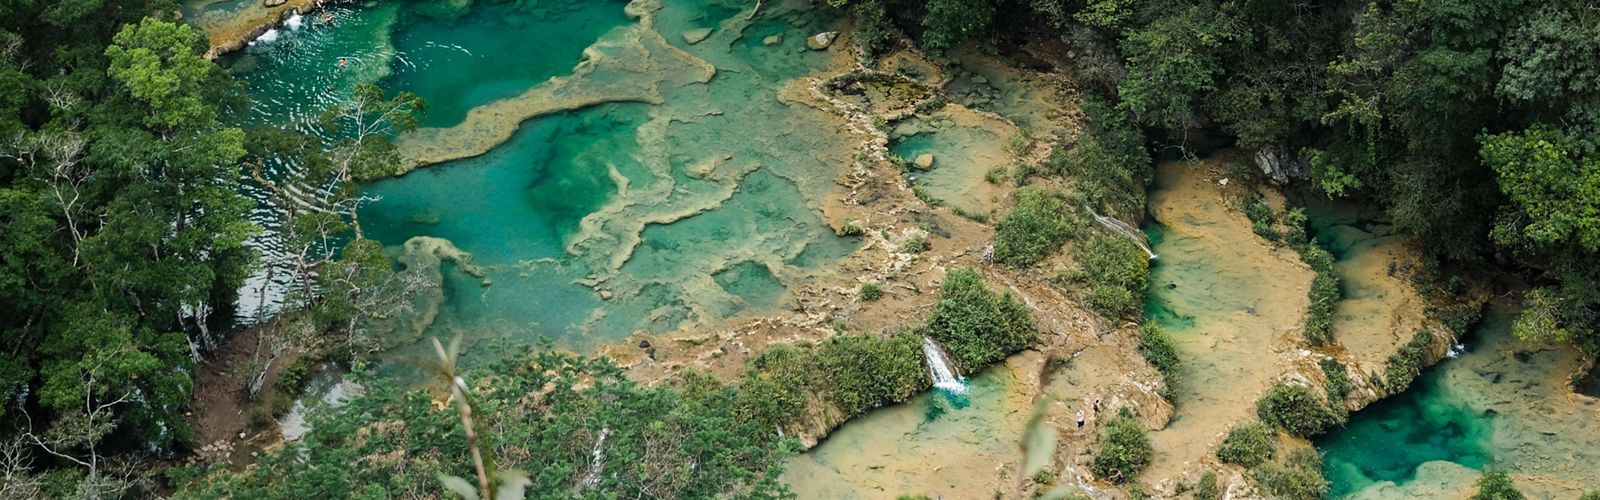 The natural pools of Semuc Champey in Guatemala are perhaps one of the most impressive natural wonders on the planet.